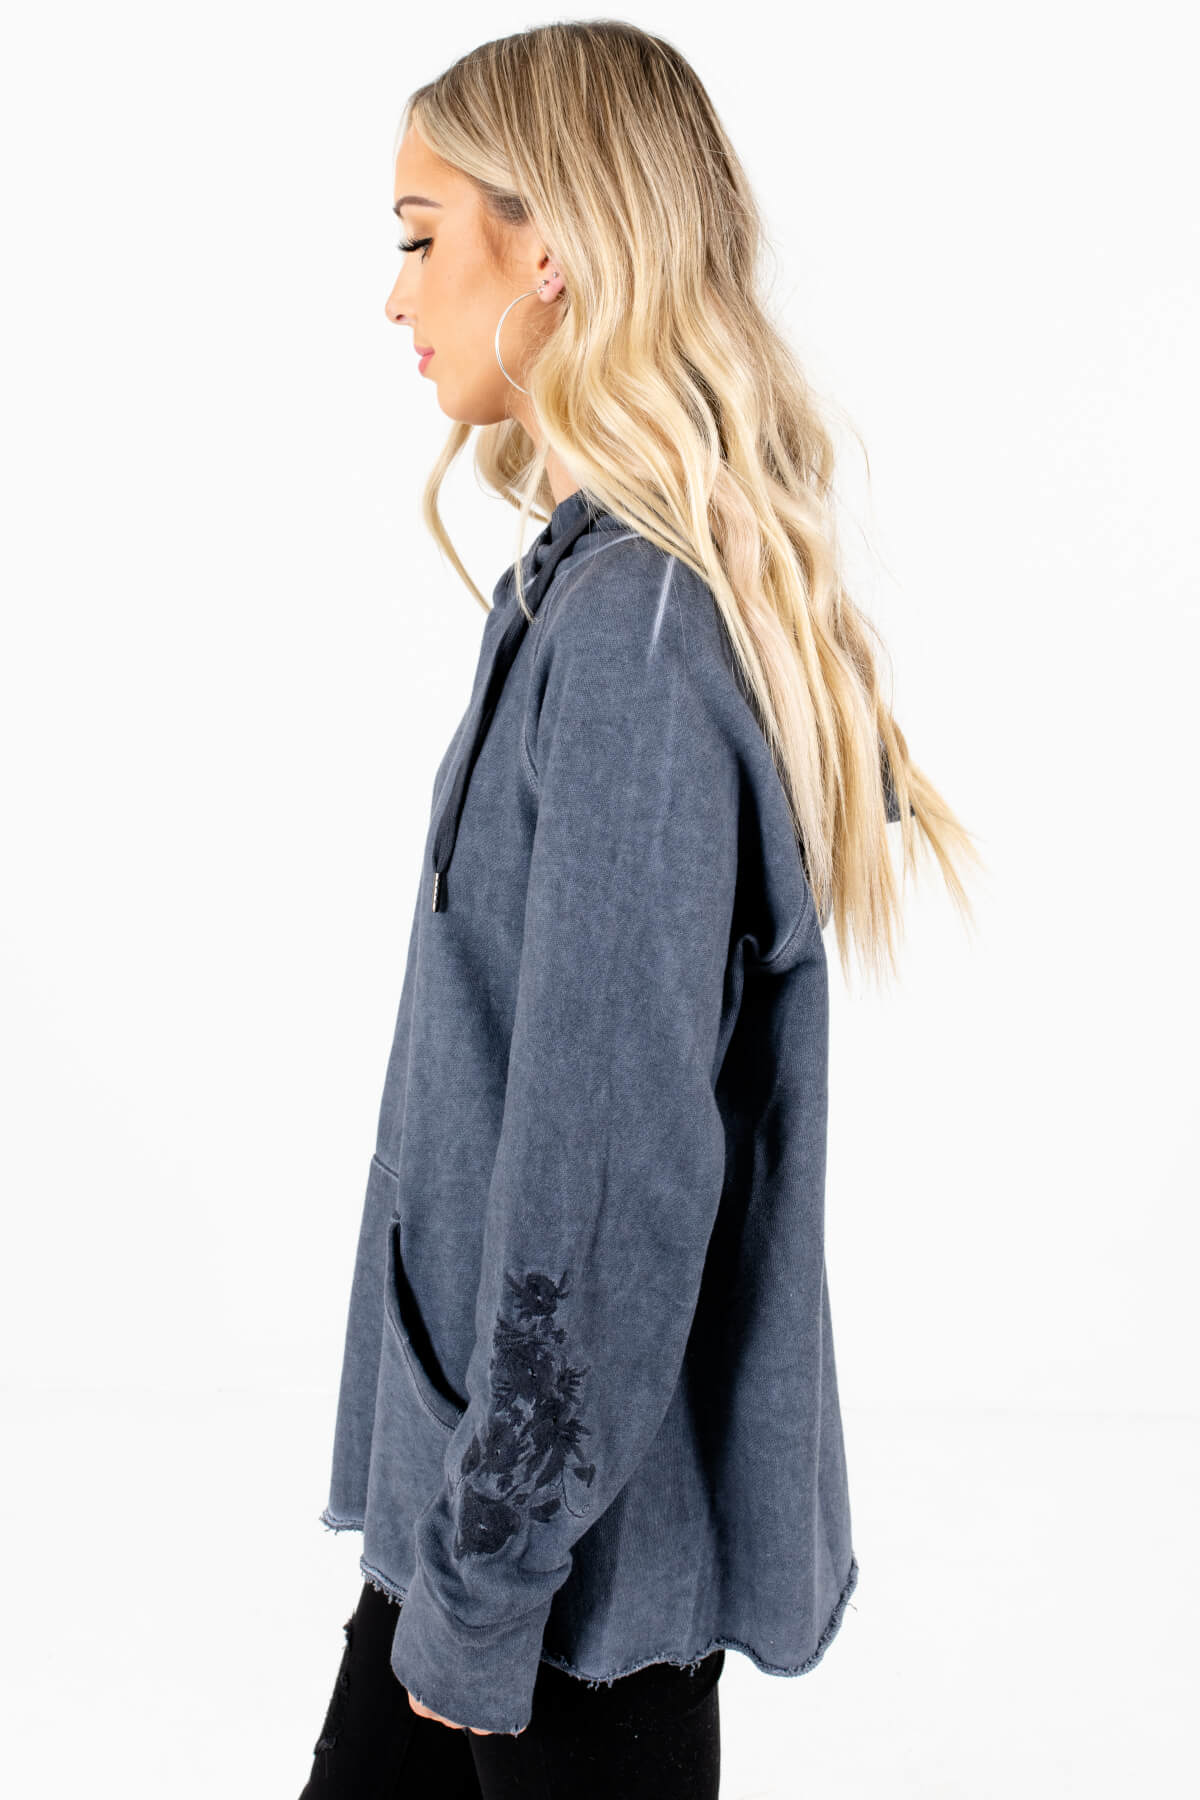 Navy Blue Oversized Relaxed Fit Boutique Hoodies for Women